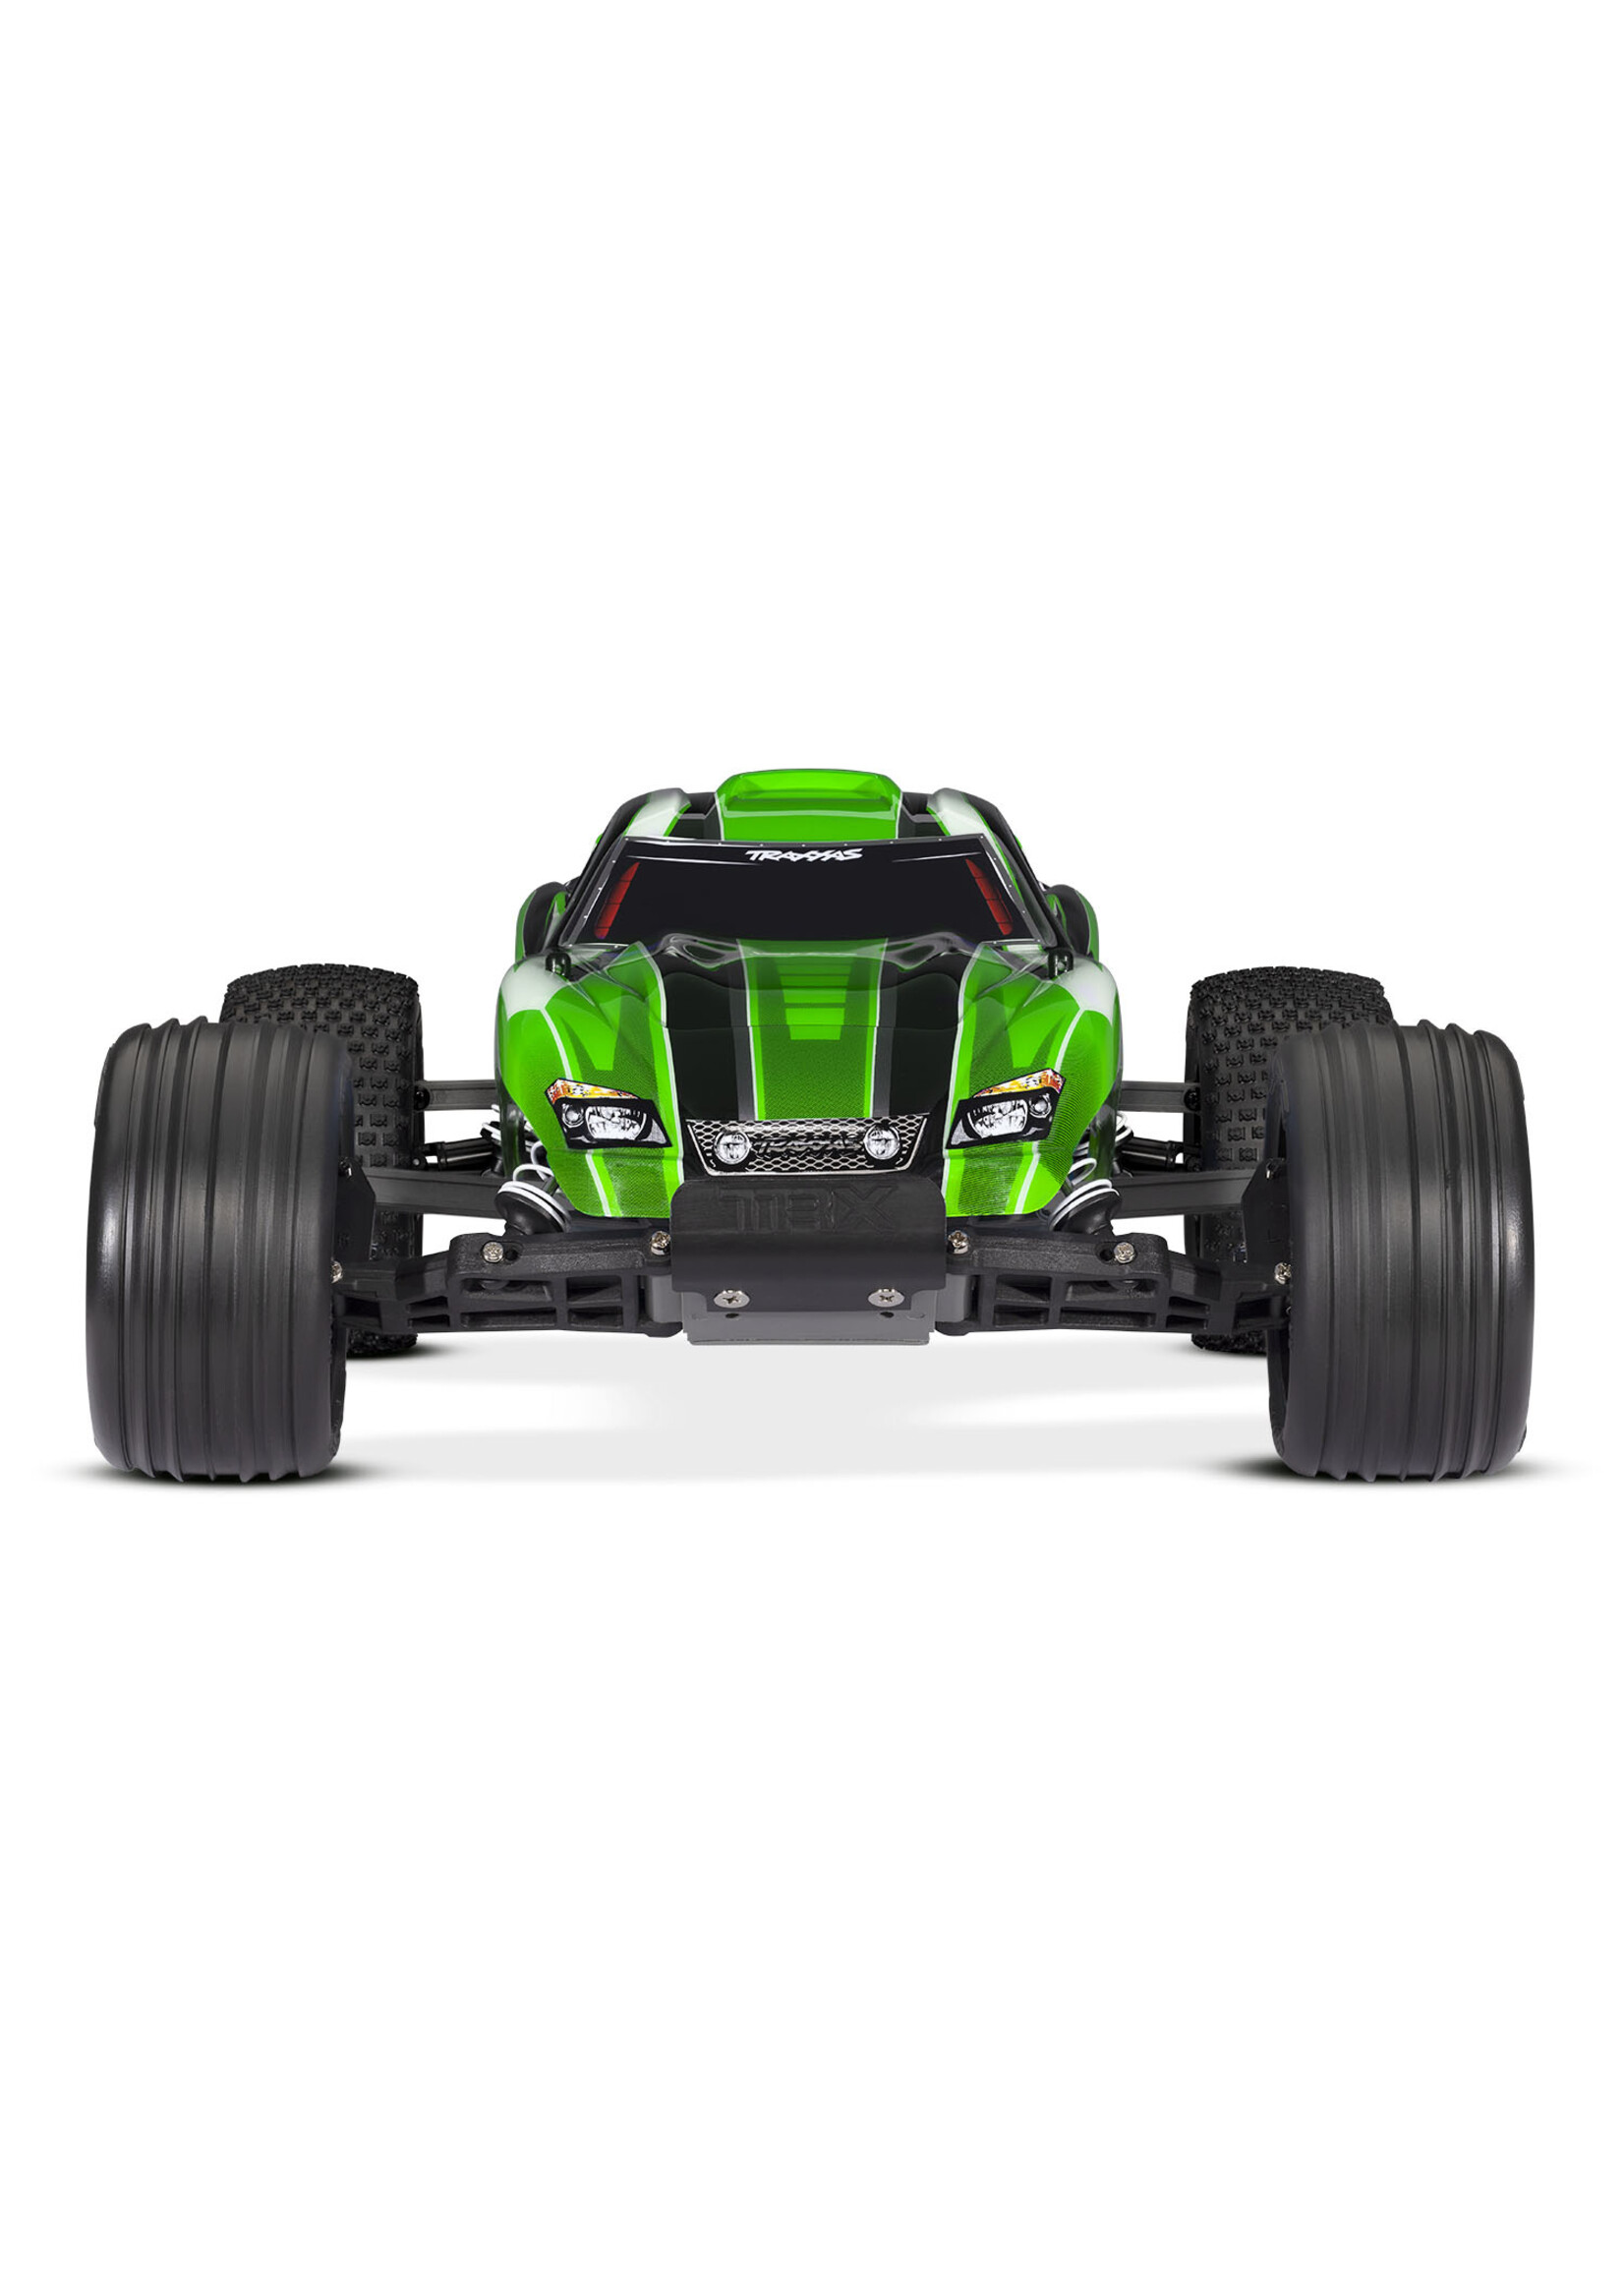 Traxxas 1/10 Rustler Stadium Truck With USB-C Charger - Green